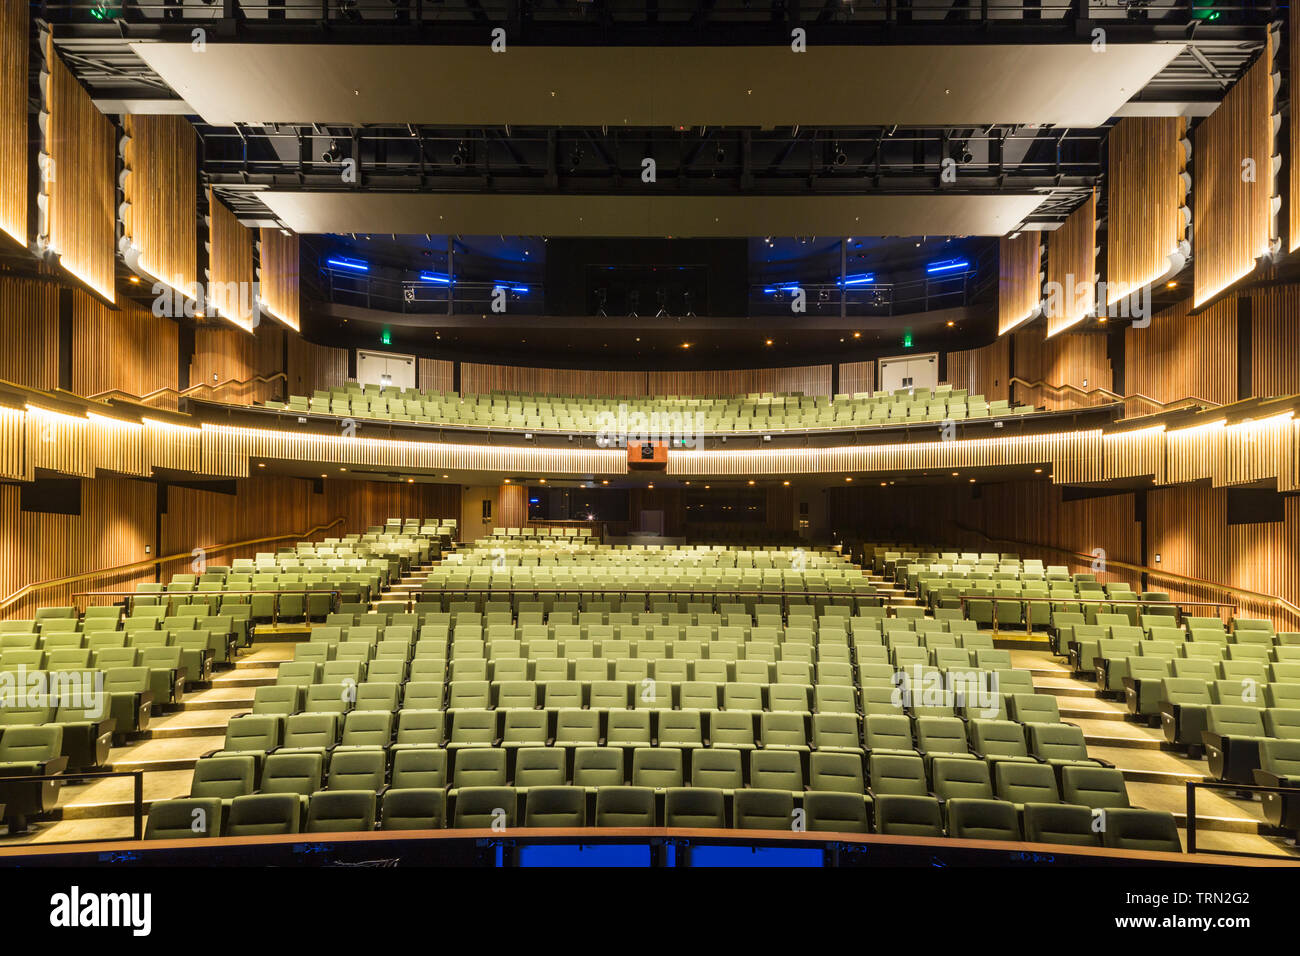 The 940 seat main theatre of the Cairns Performing Arts Centre, Cairns, Queensland, Australia Stock Photo